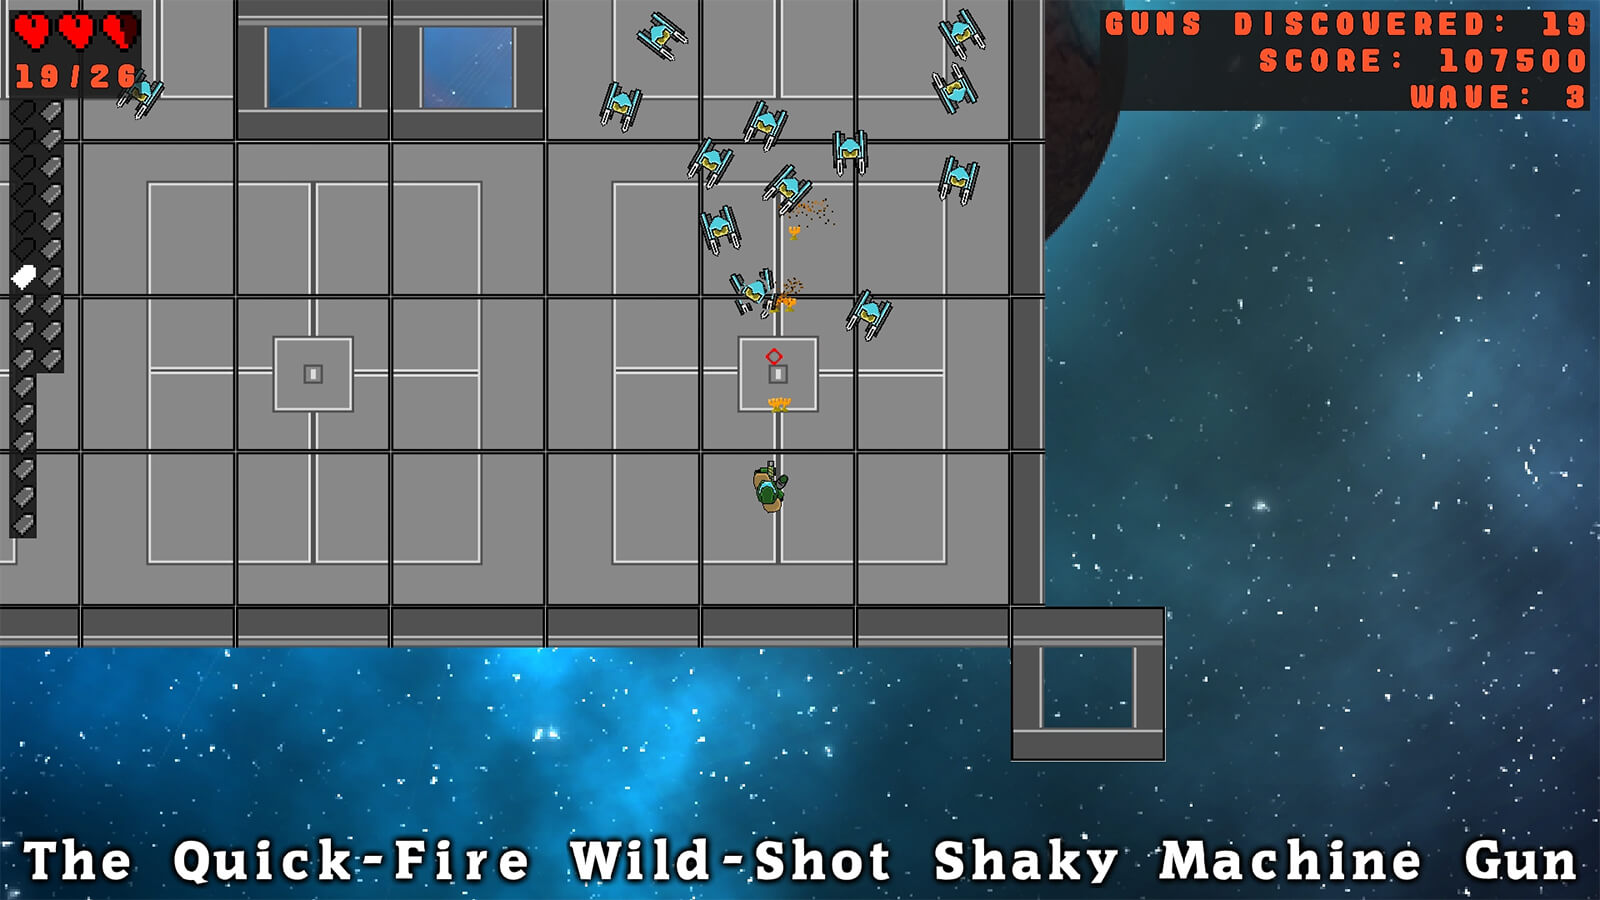 A wave of robots attacks the player, who is wielding "The Quick-Fire Wild-Shot Shaky Machine Gun."